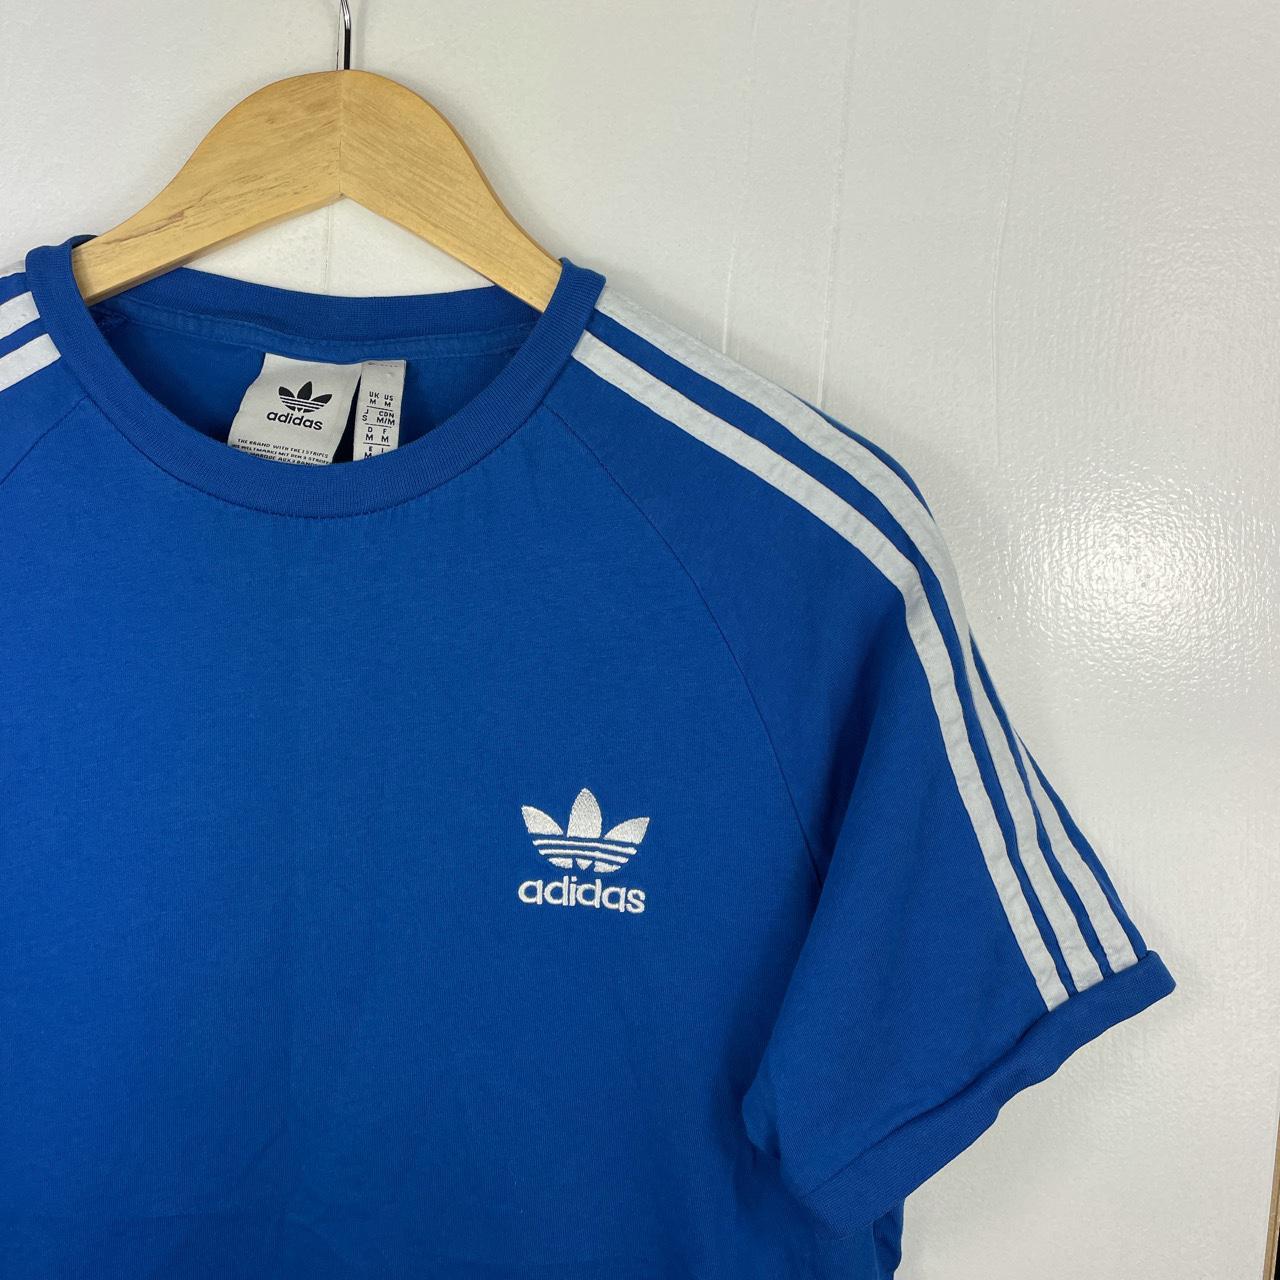 Adidas classic 3-stripe t shirt in bright blue, with... - Depop